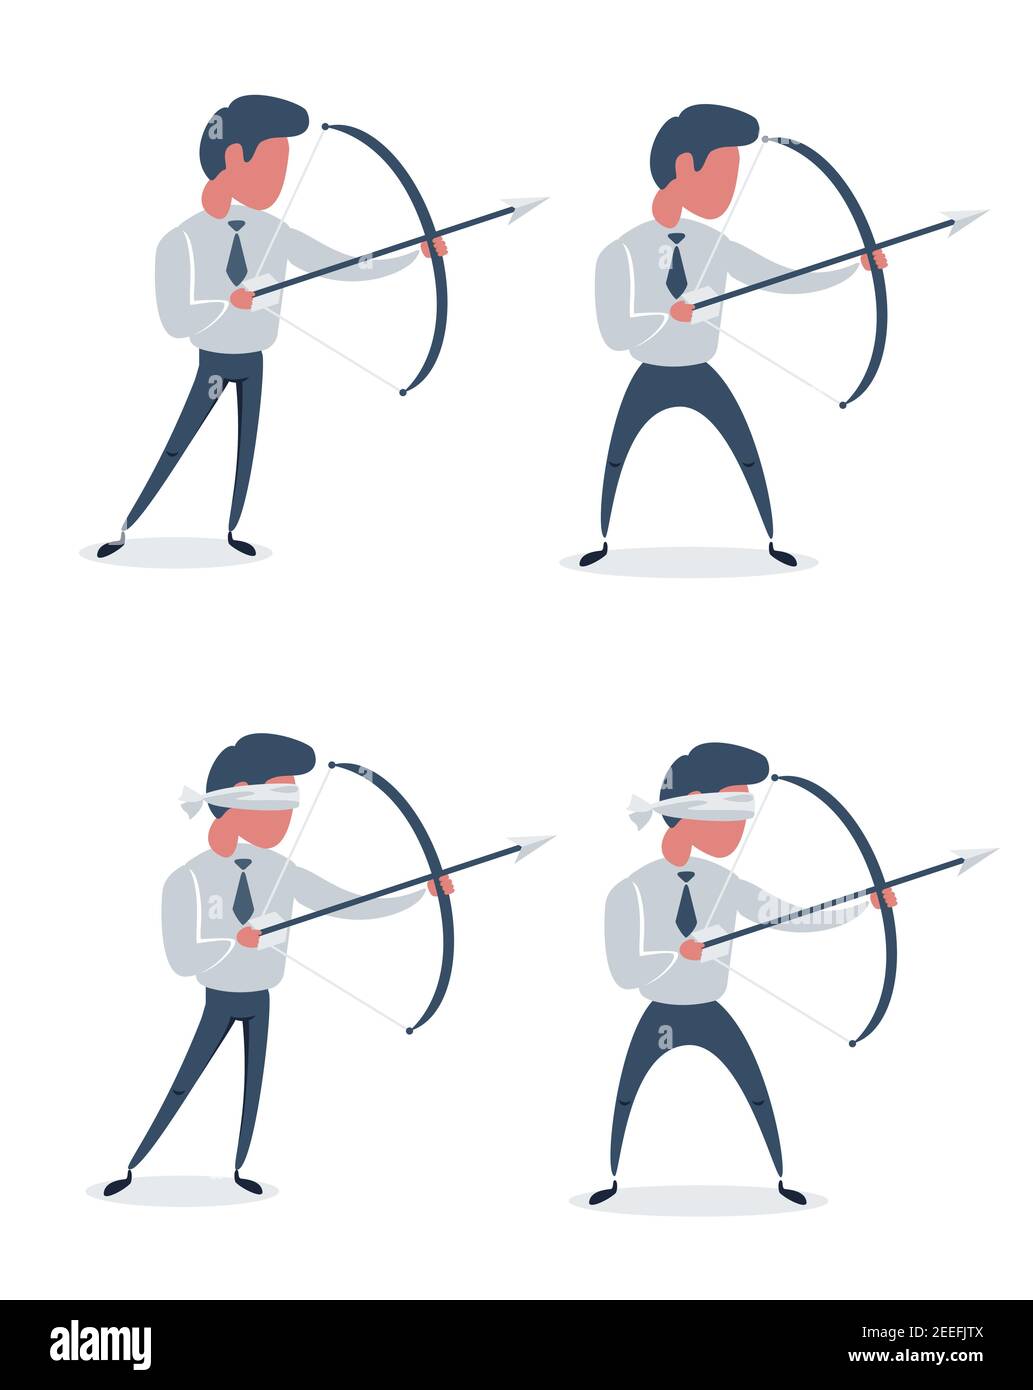 Full length portrait of a young businessman aiming with a bow and arrow isolated on white background. Set. Flat design illustration. Stock Vector